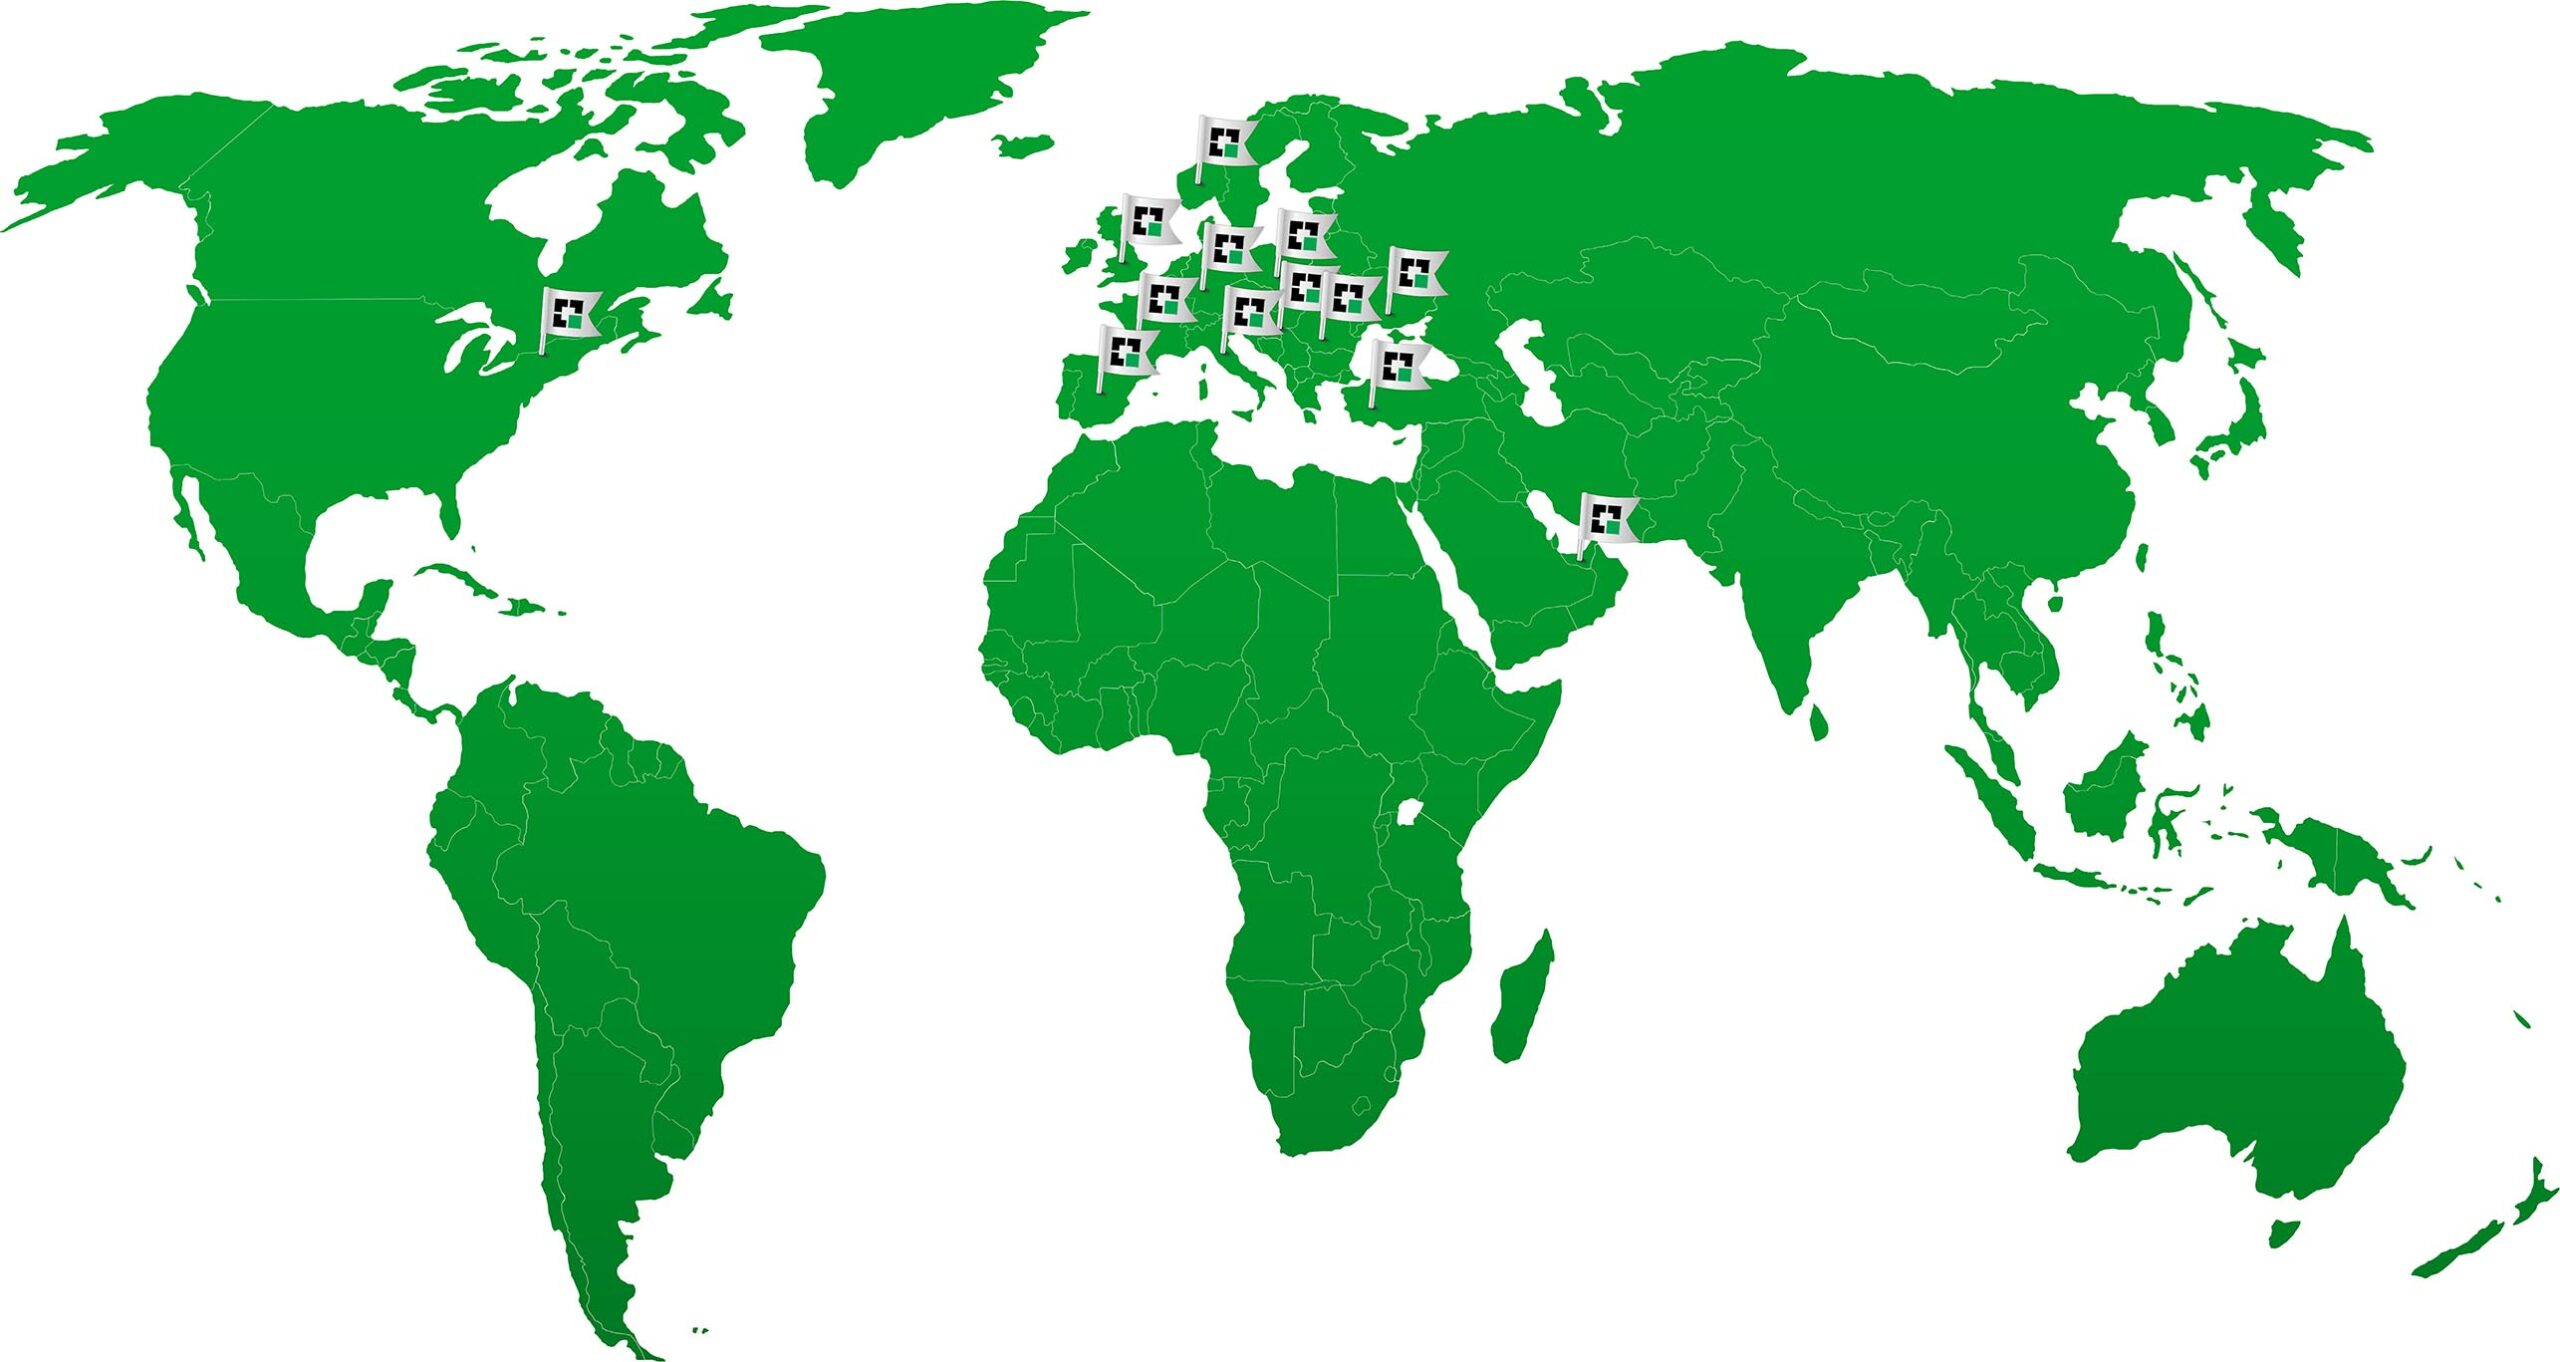 ABOUT US LME - international reach - map showing our range